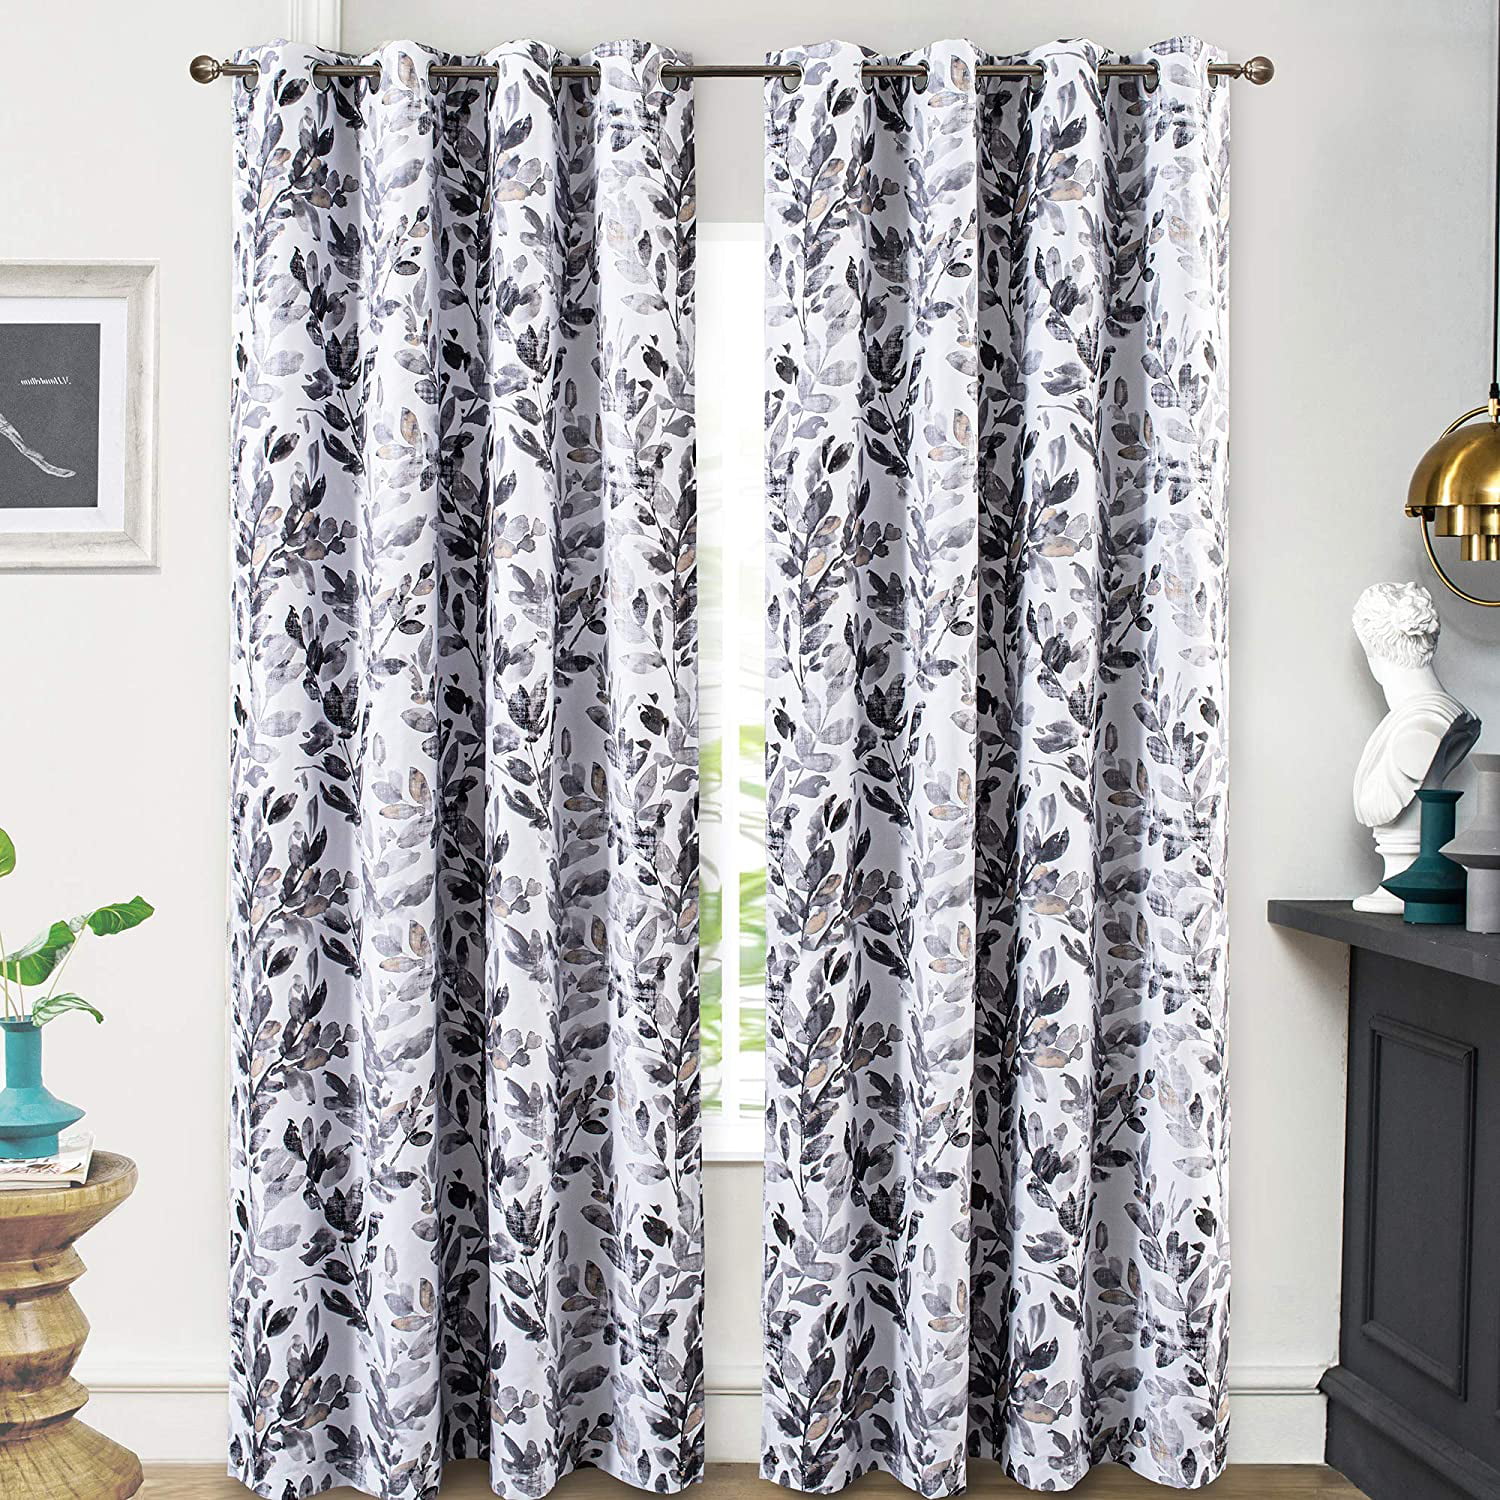 Home 2Tier 36"L 1Valance 18"L Blackout Solid Curtain Rod Pocket Small Window. 